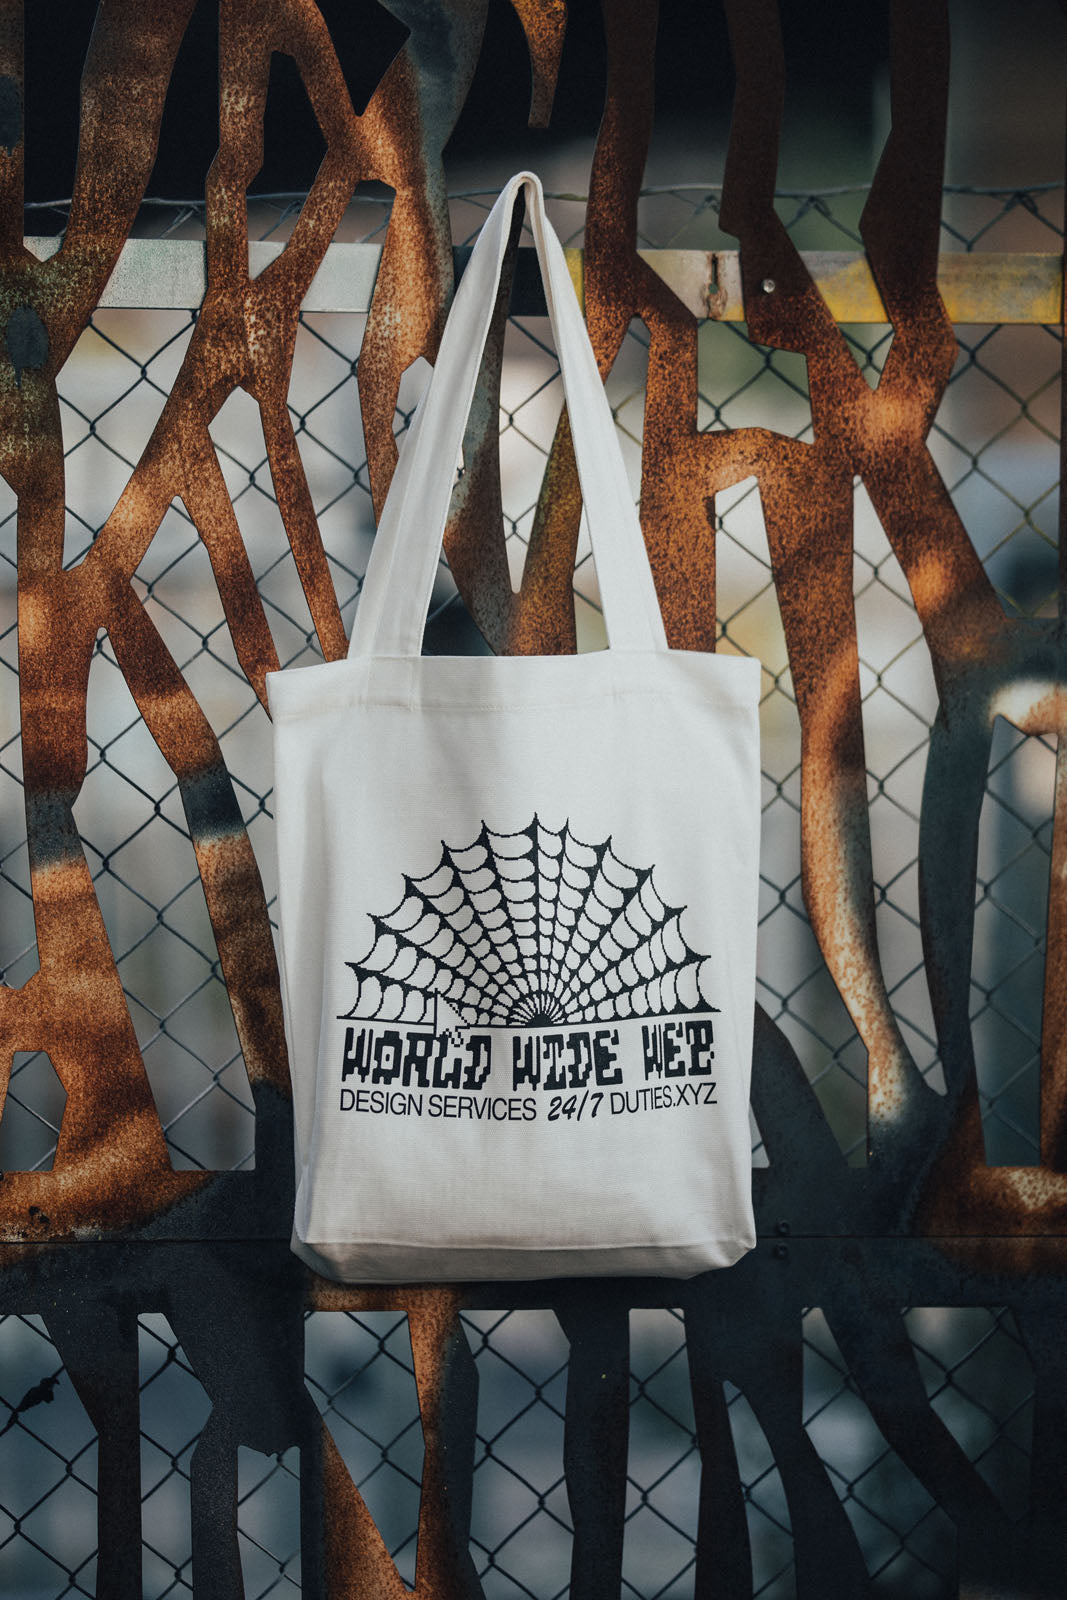 Photo of the Ecru-colored World Wide Web tote bag hanging on a rusty fence, showcasing the black printed Duties World Wide Web graphic on the fabric.